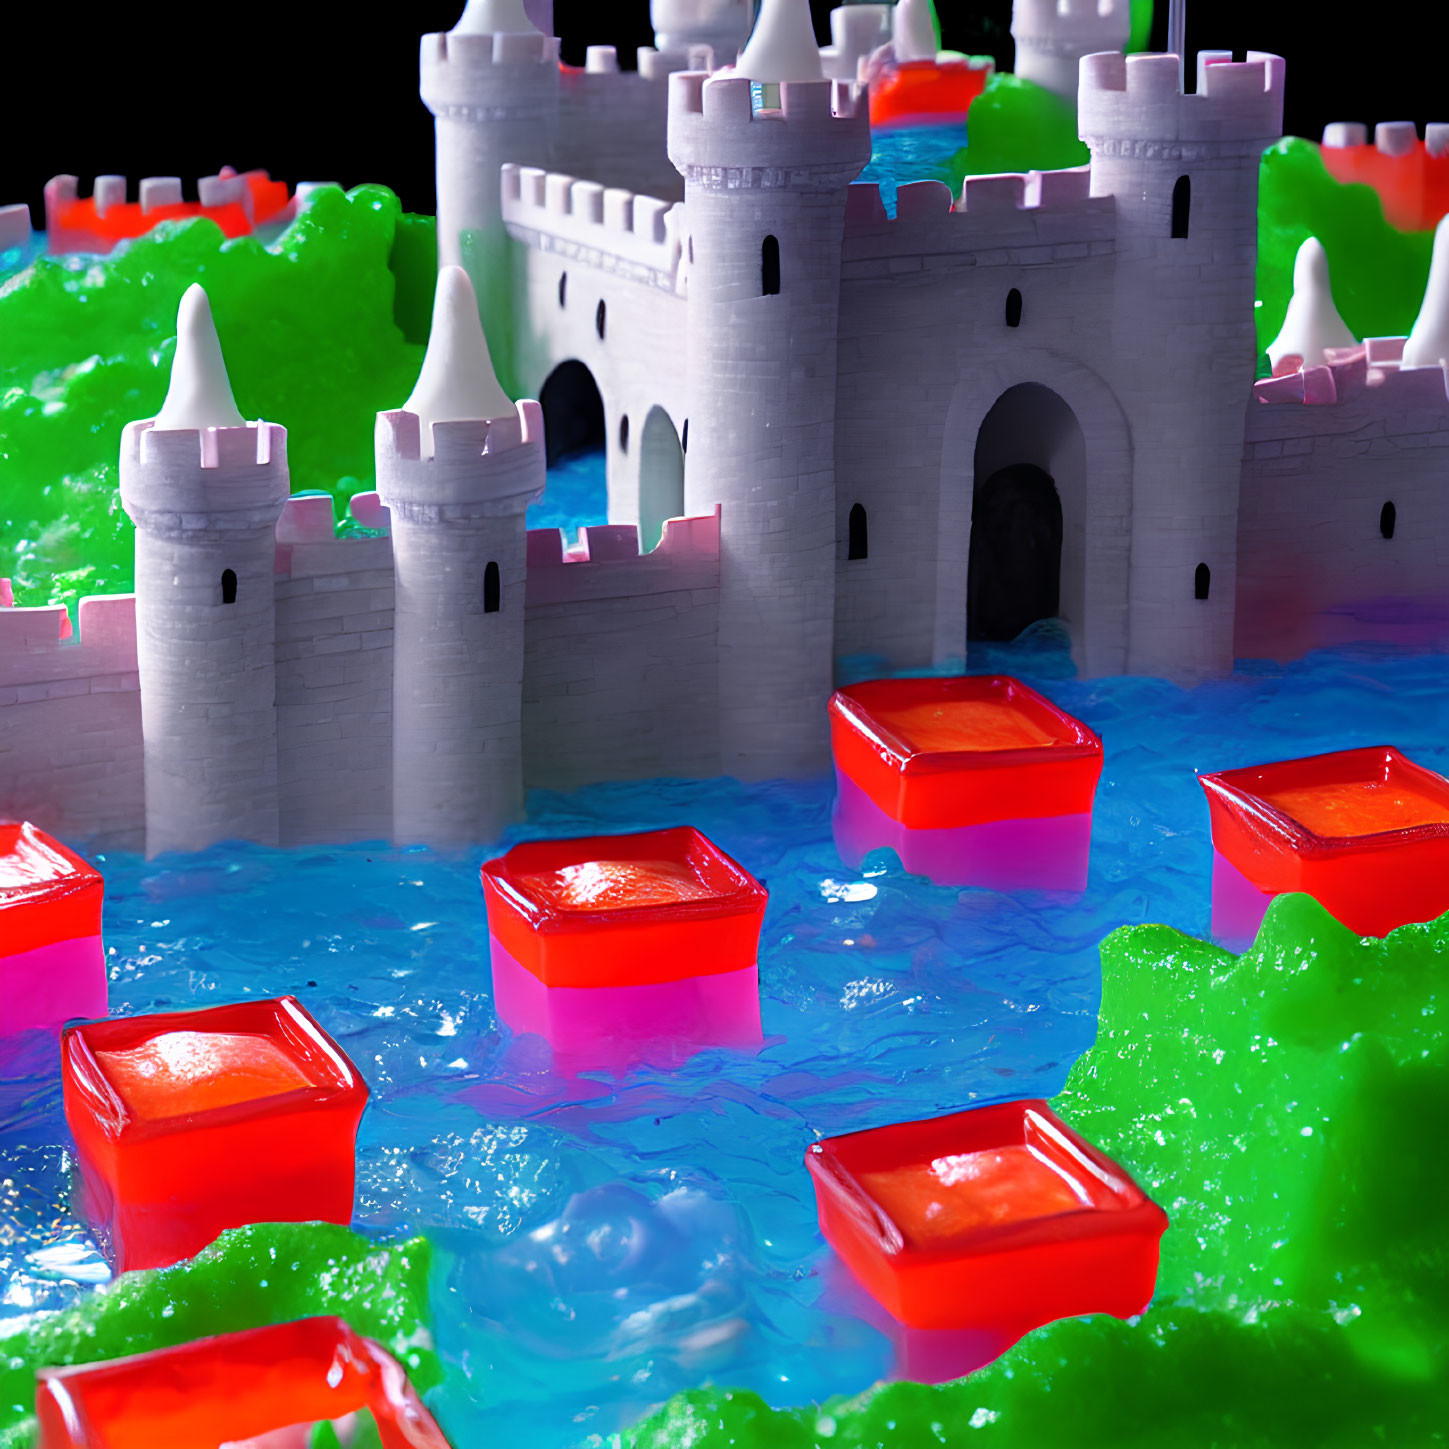 Fantasy-inspired diorama with gray castle, pink accents, moat, red boats, and green